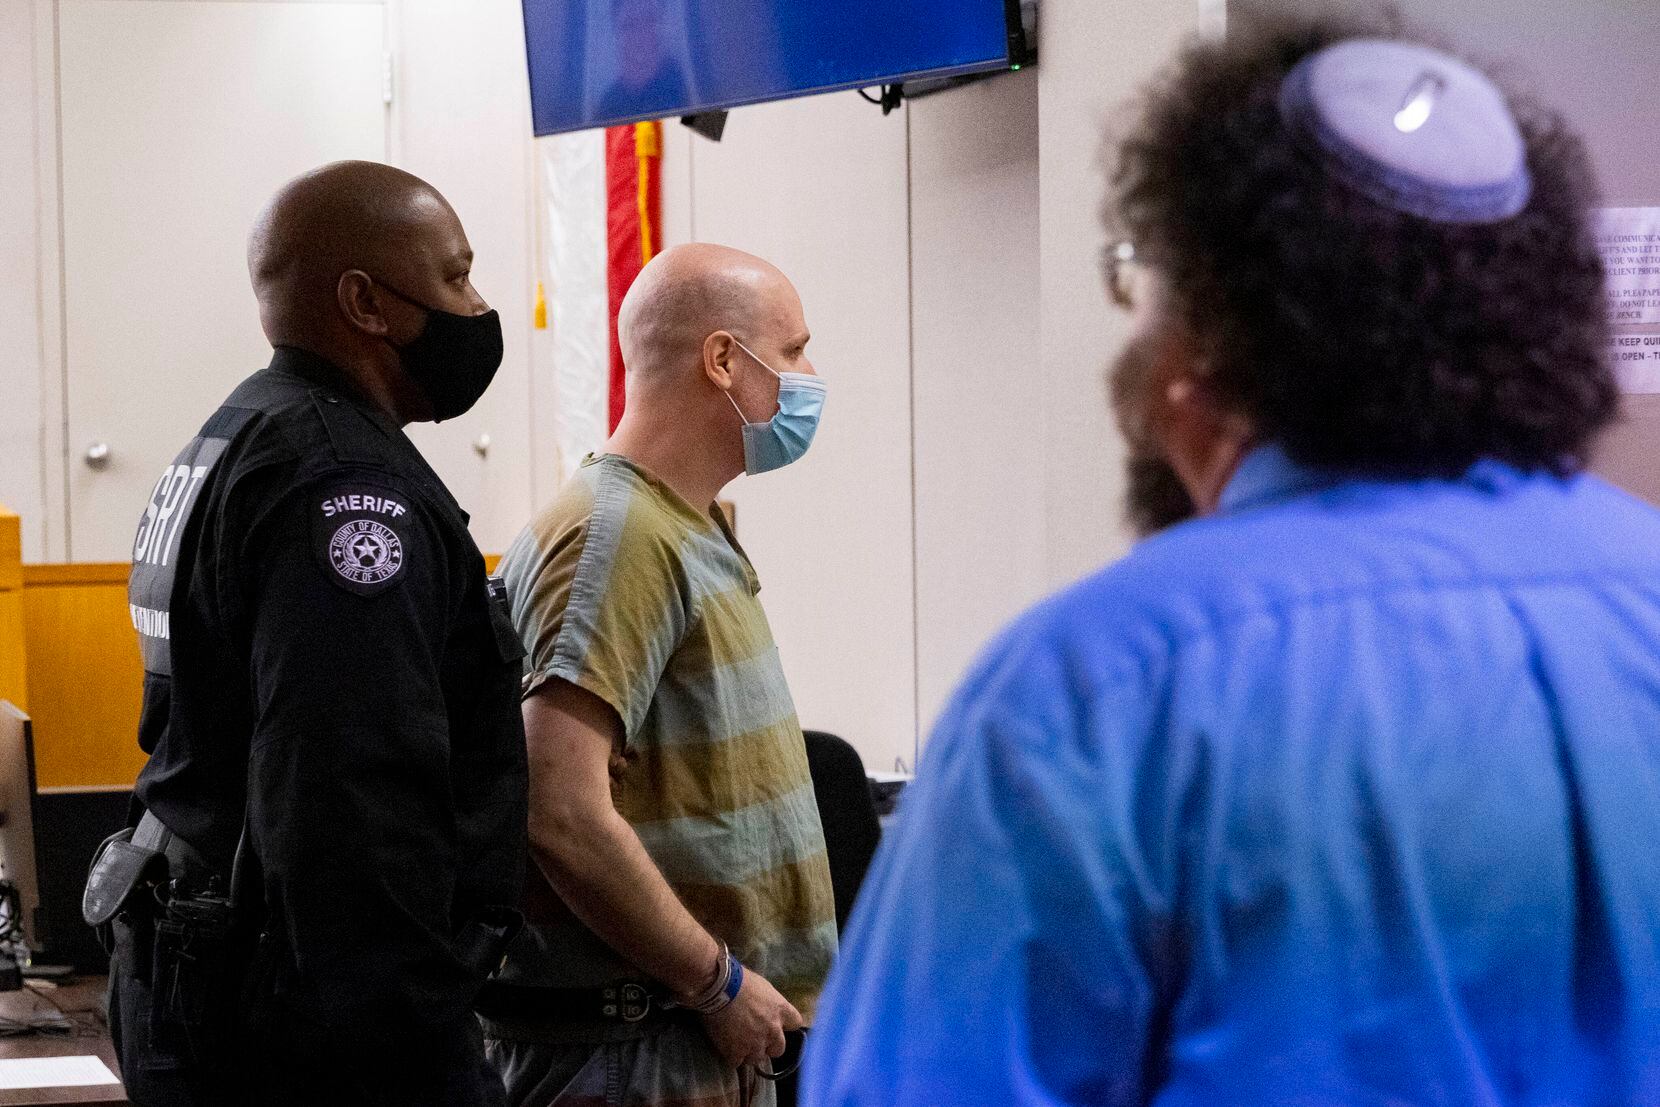 Randy Halprin, one of the Texas Seven prison escapees convicted in the murder of an Irving police officer, is escorted out of the 283rd Judicial District Court where lawyers argued whether the judge at his 2003 trial prejudiced the jury against him on Wednesday, July 14, 2021, at Frank Crowley Courthouse in Dallas. (Juan Figueroa/The Dallas Morning News)